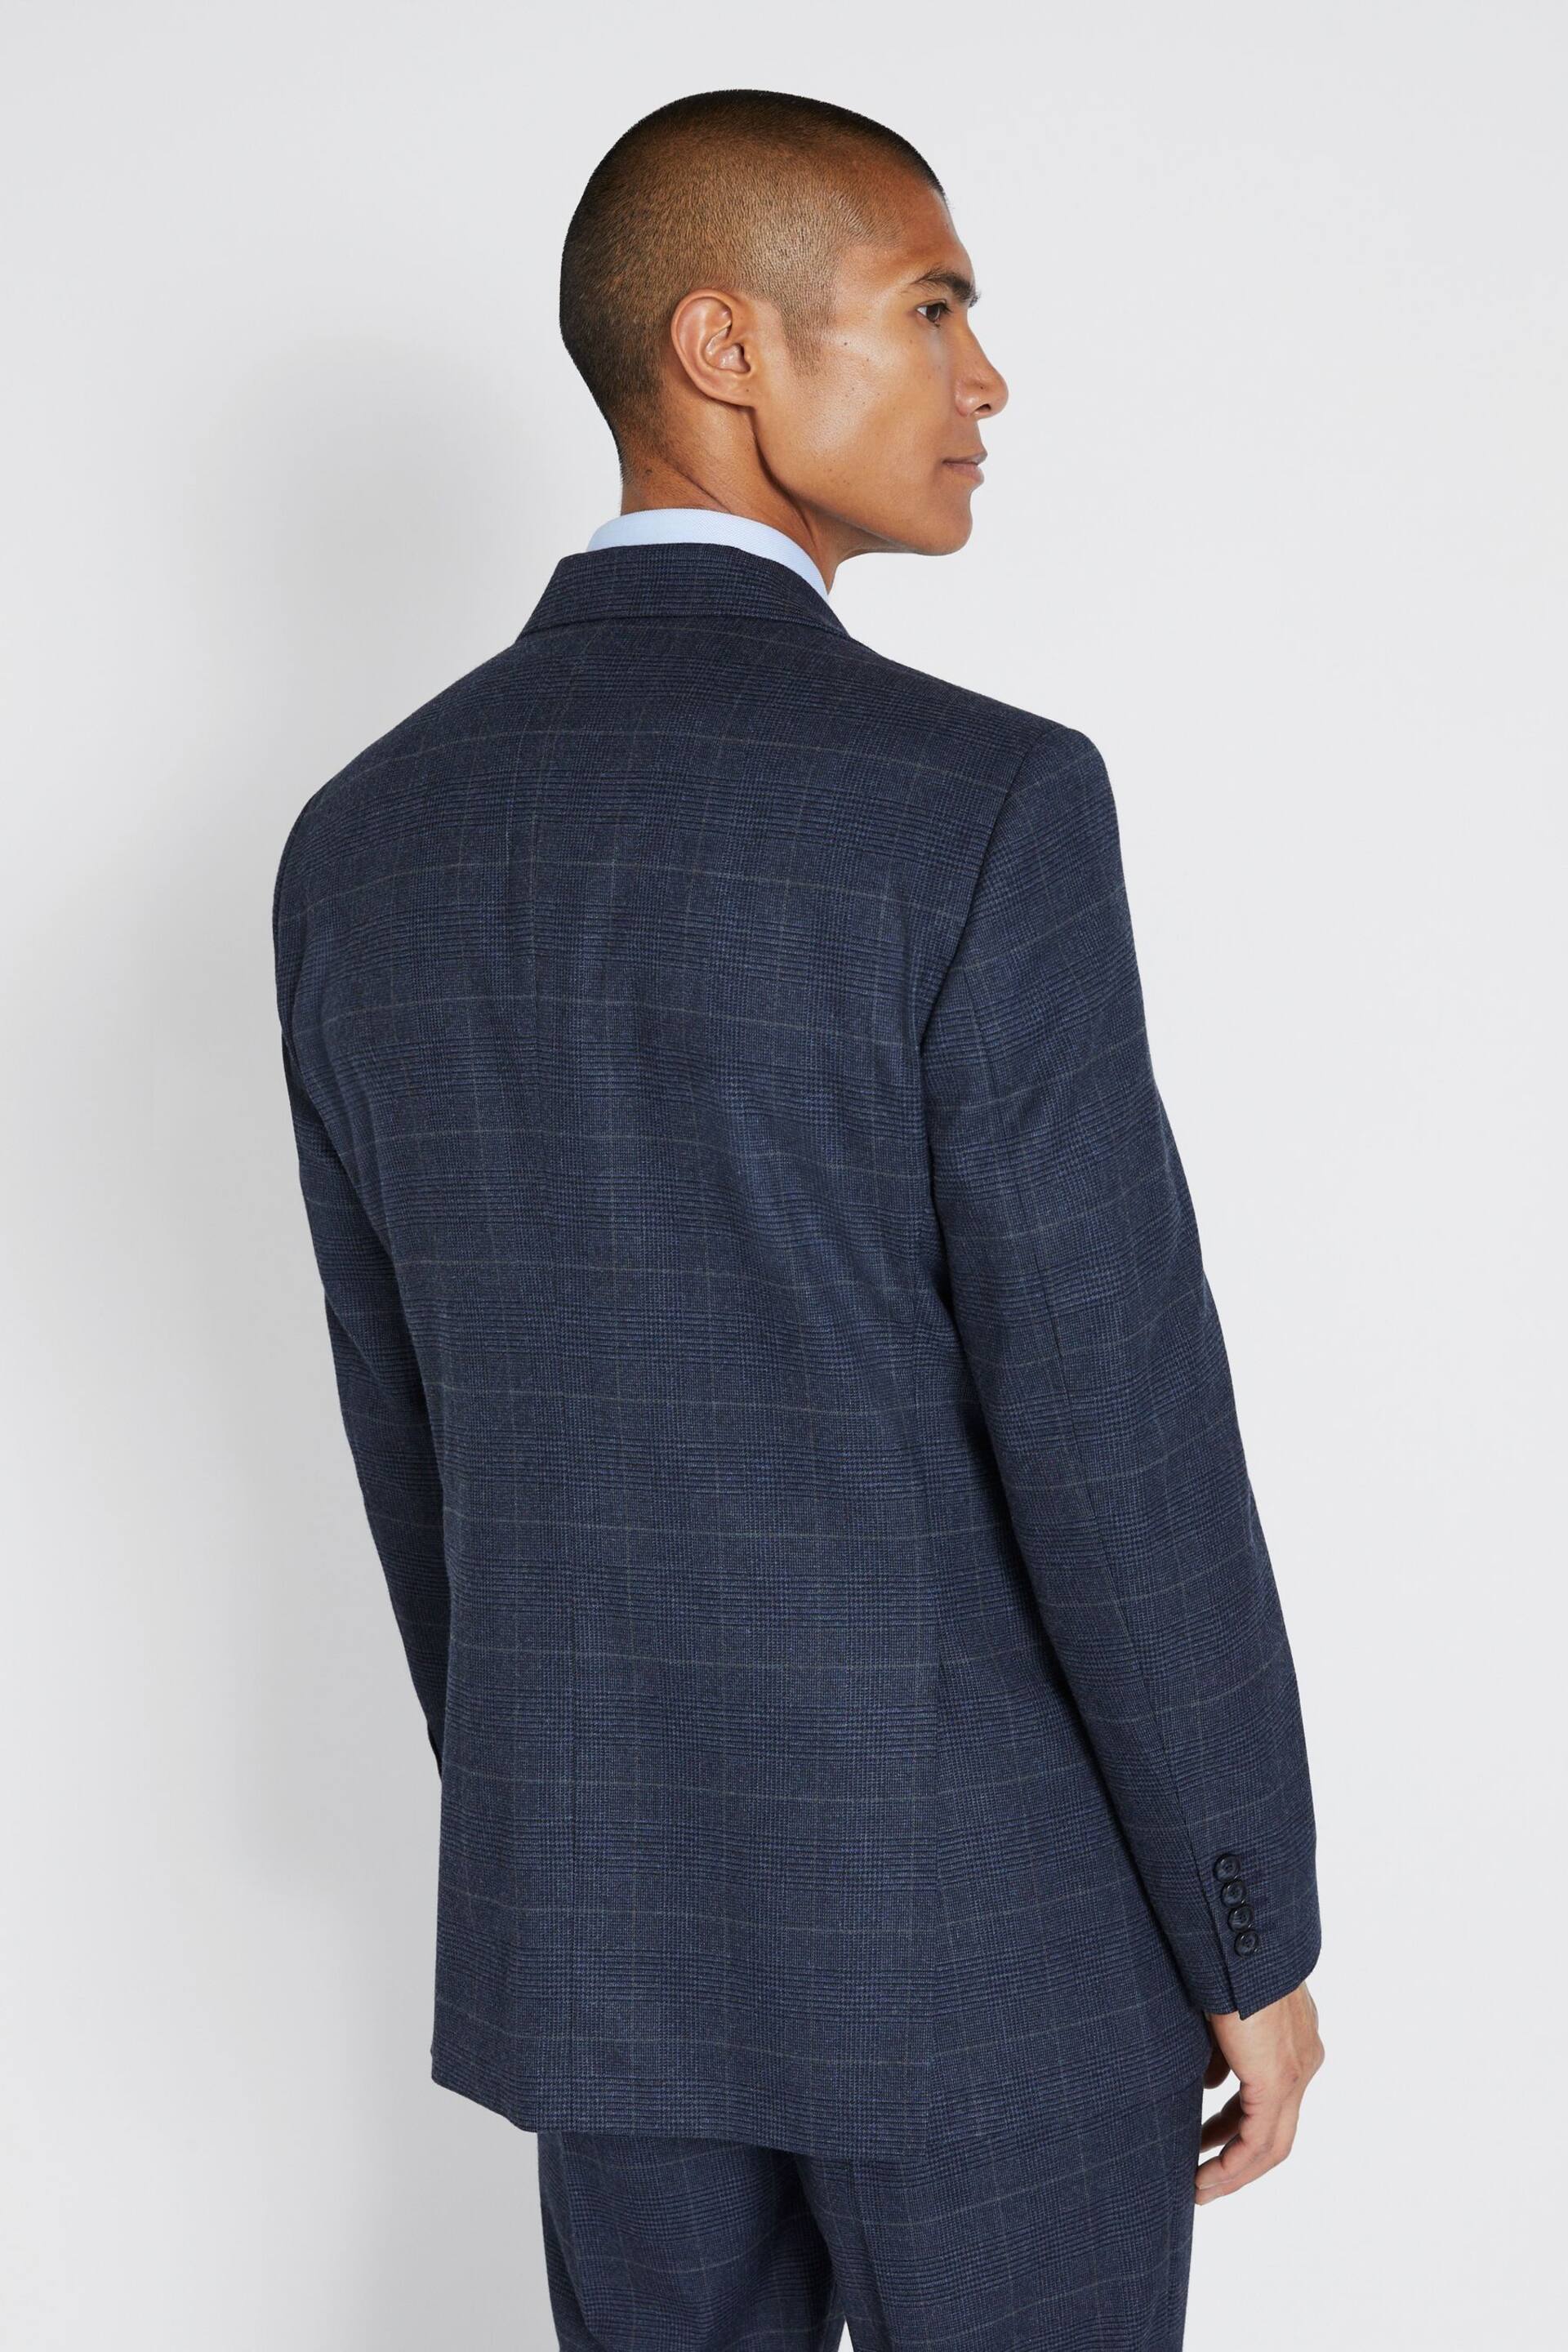 MOSS Regular Fit Blue With Khaki Check Suit: Jacket - Image 2 of 5